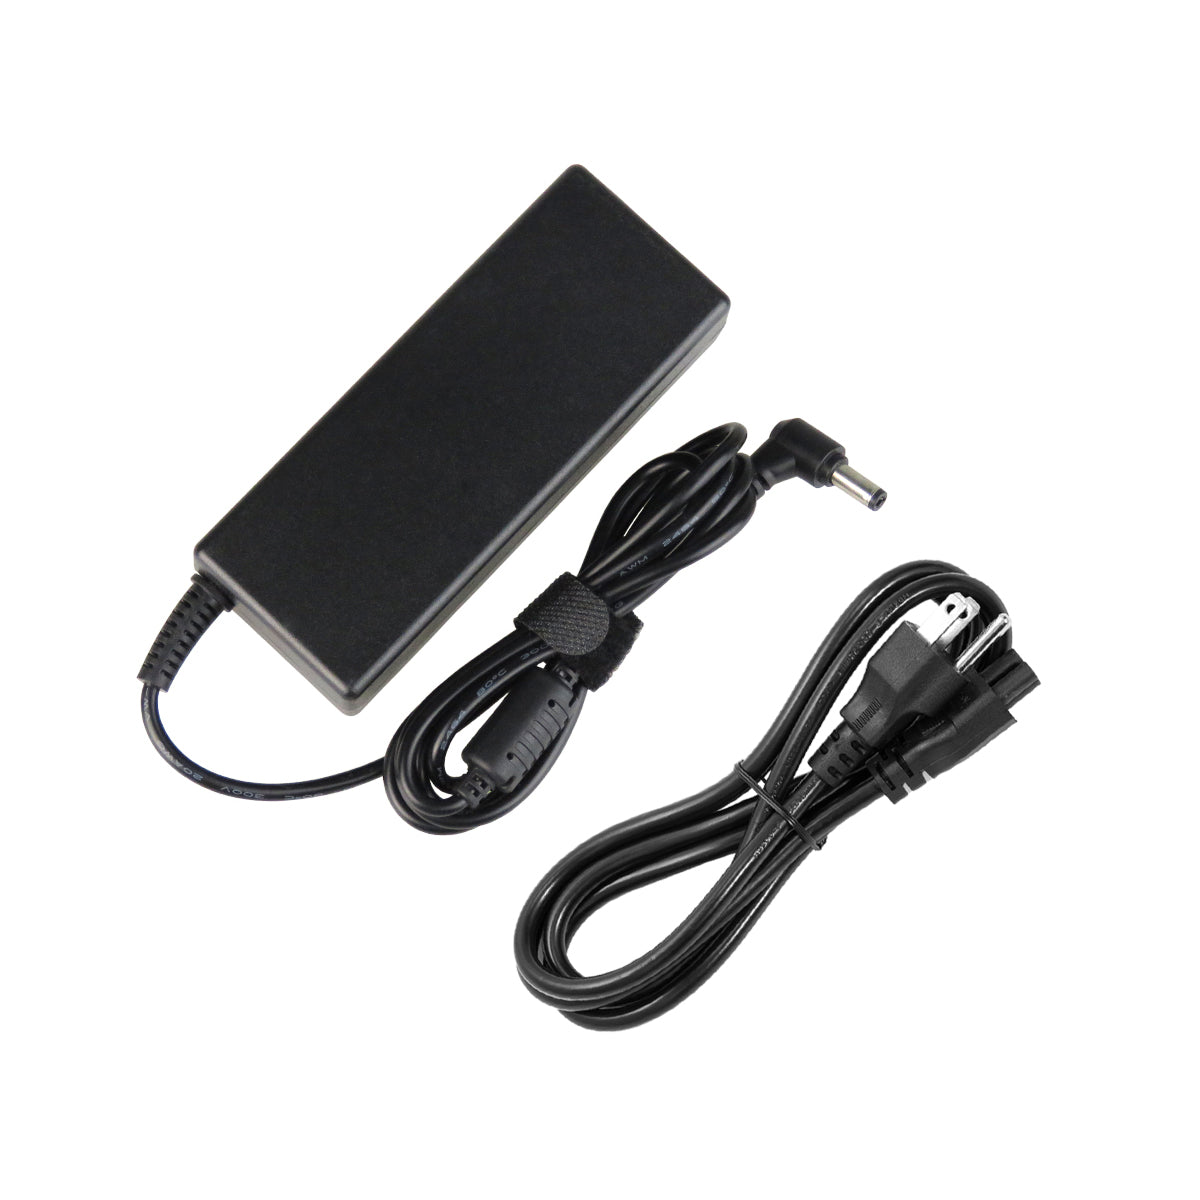 AC Adapter Charger for ASUS V2 Notebook.